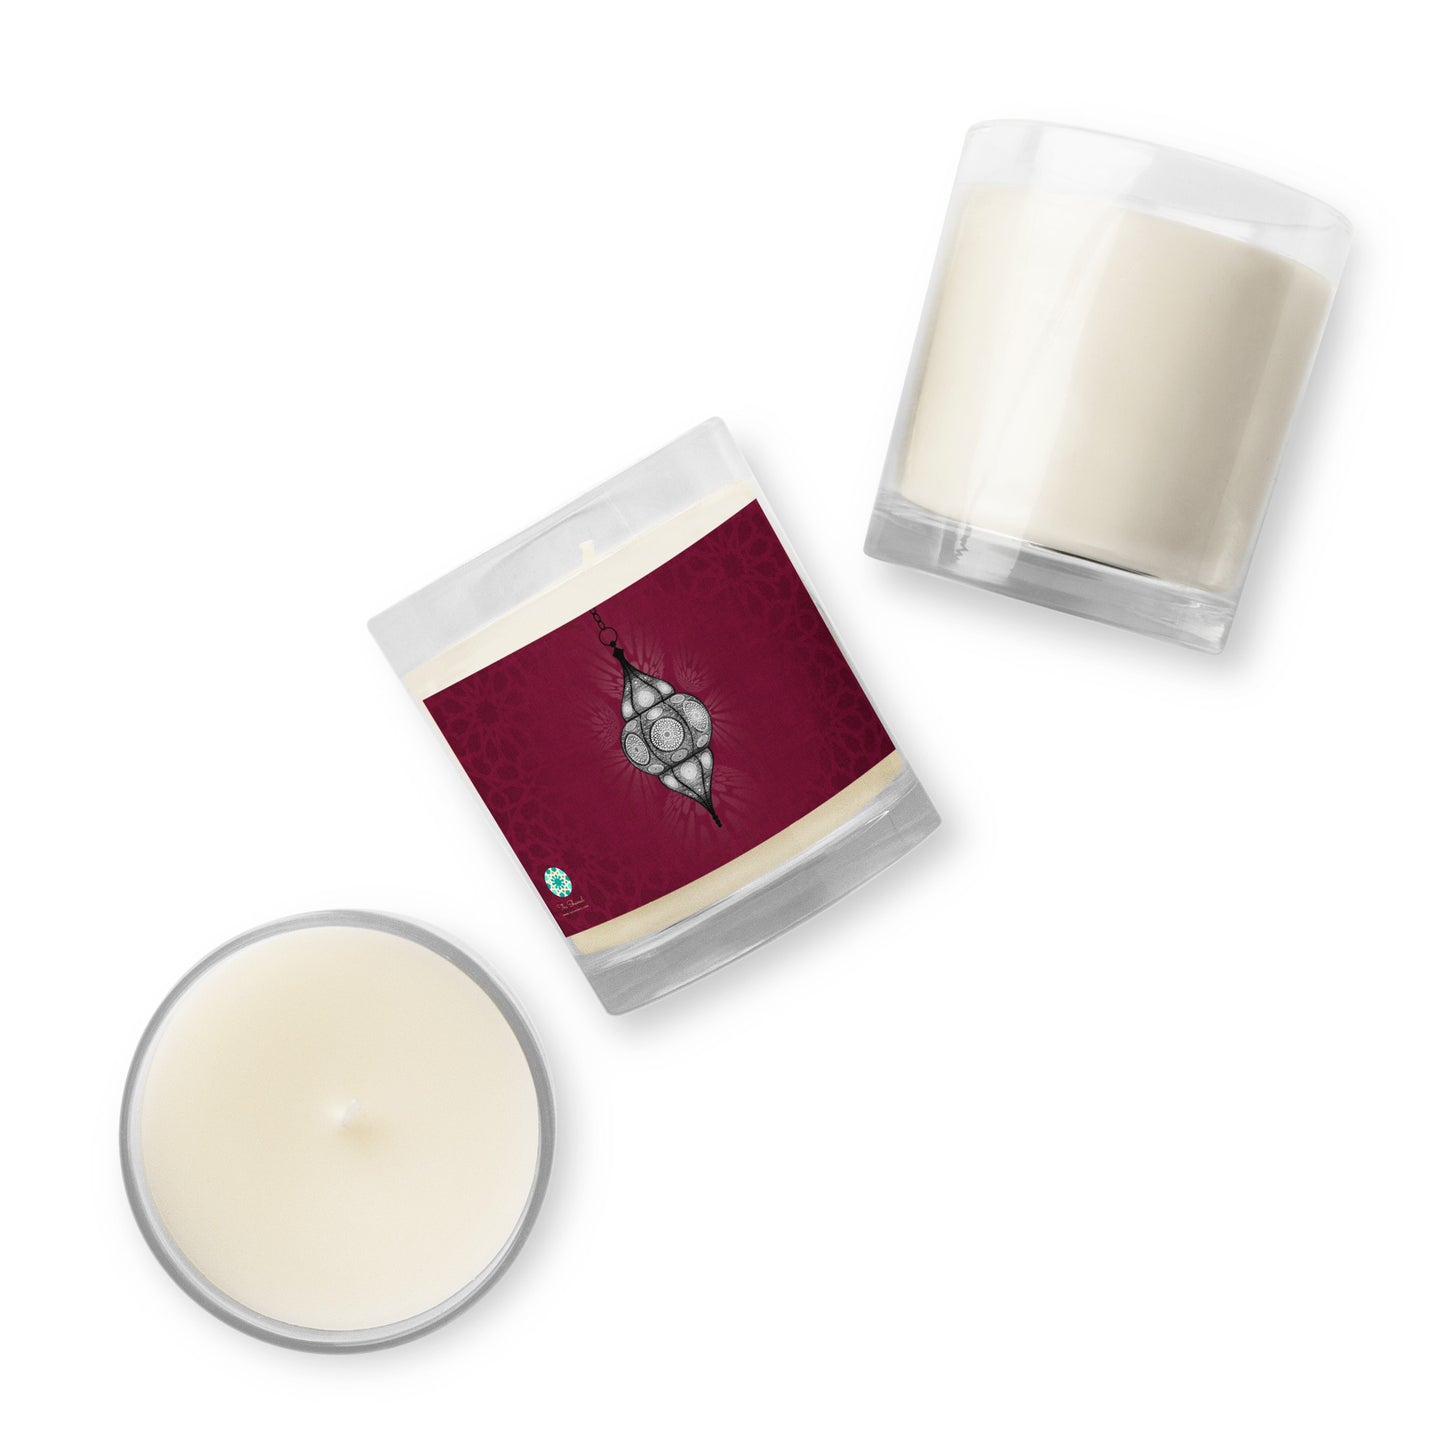 Soy Wax Candle - Moroccan Lantern Rouge